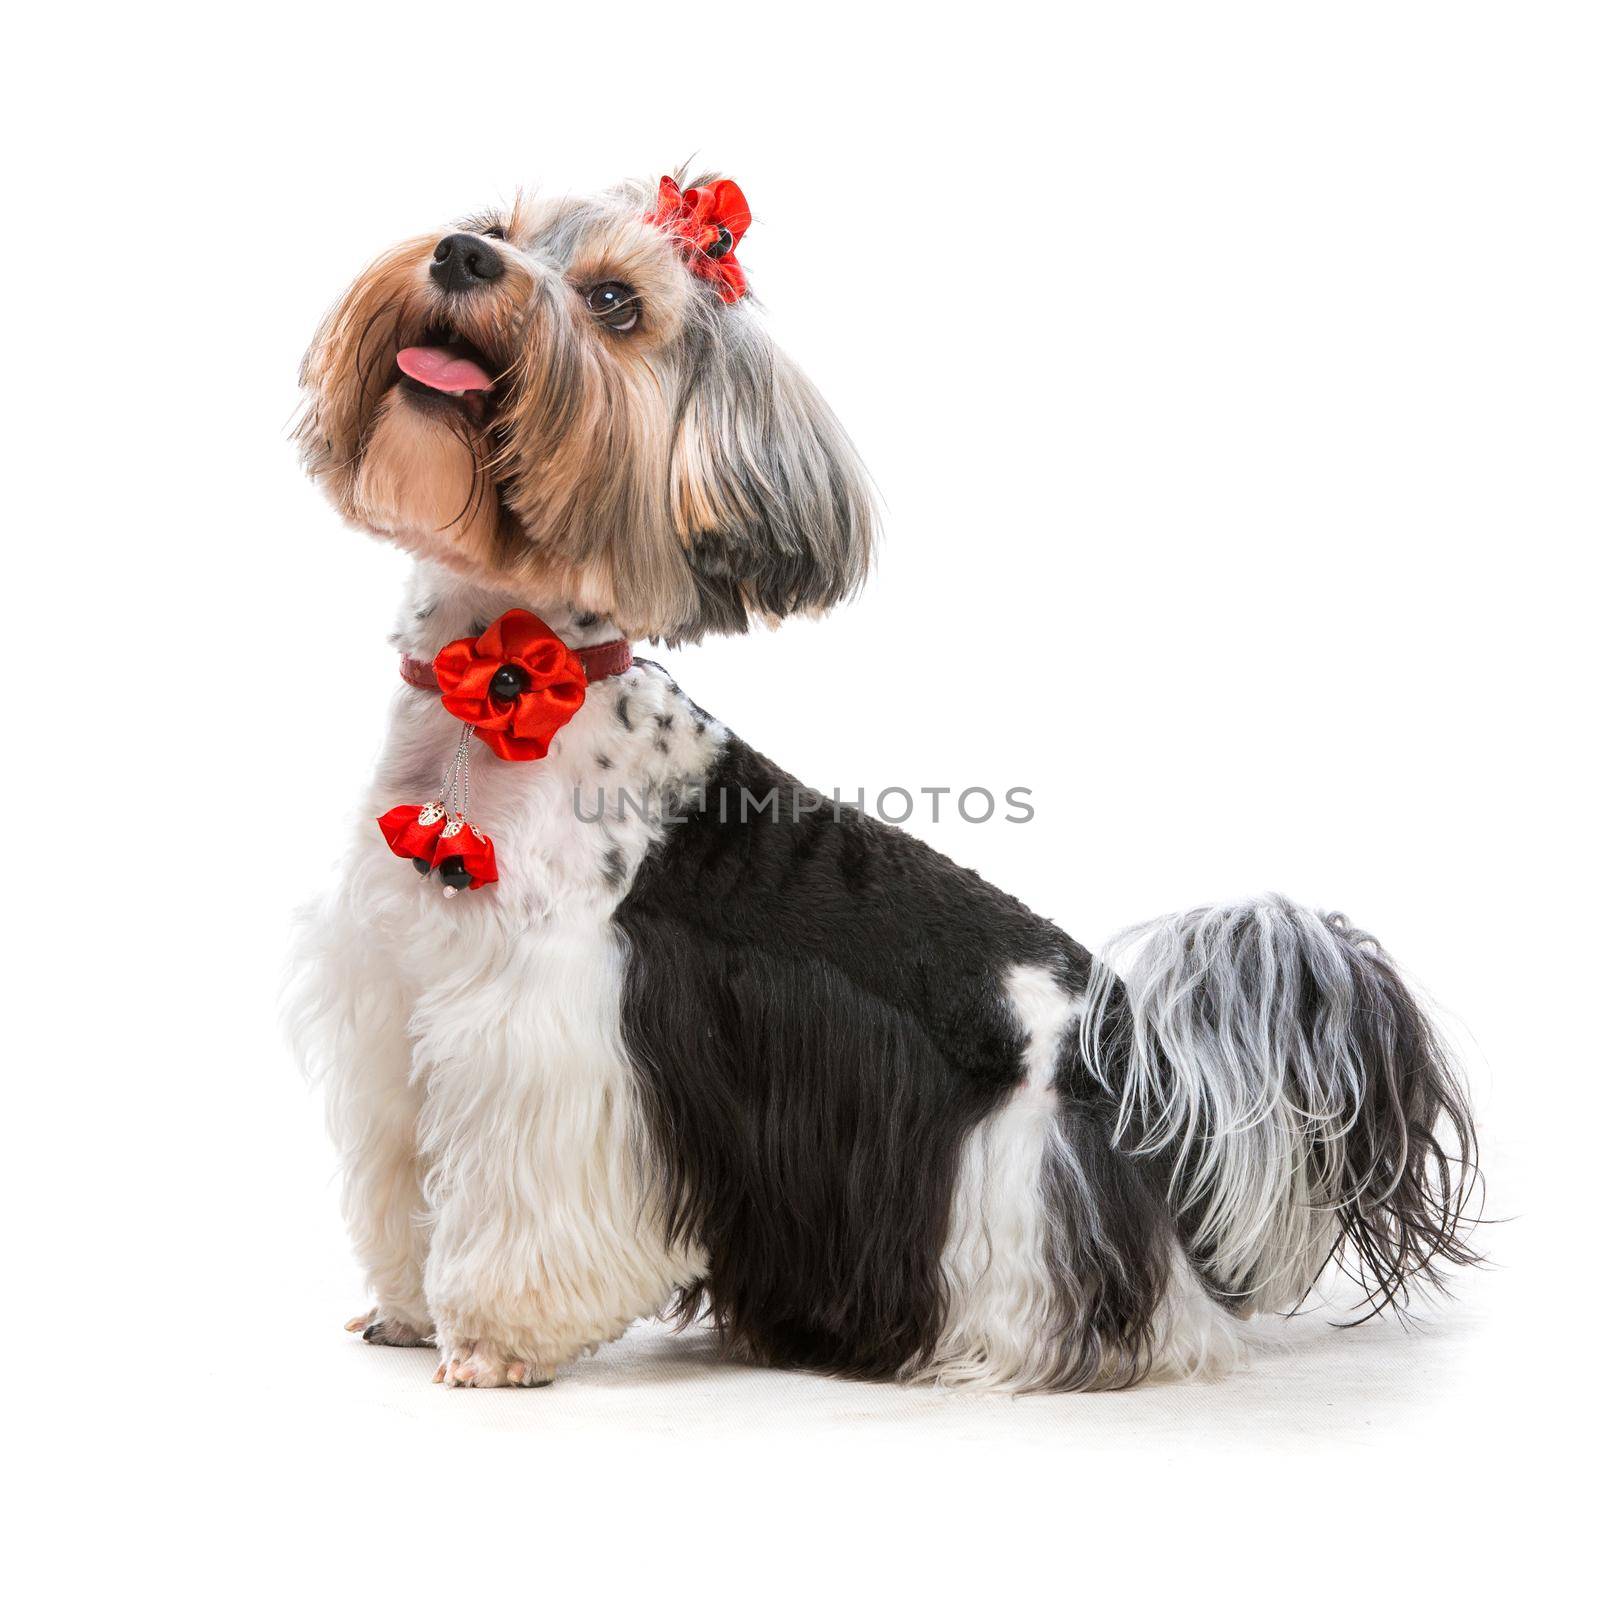 Lovely male of the Yorkshire Terrier on white